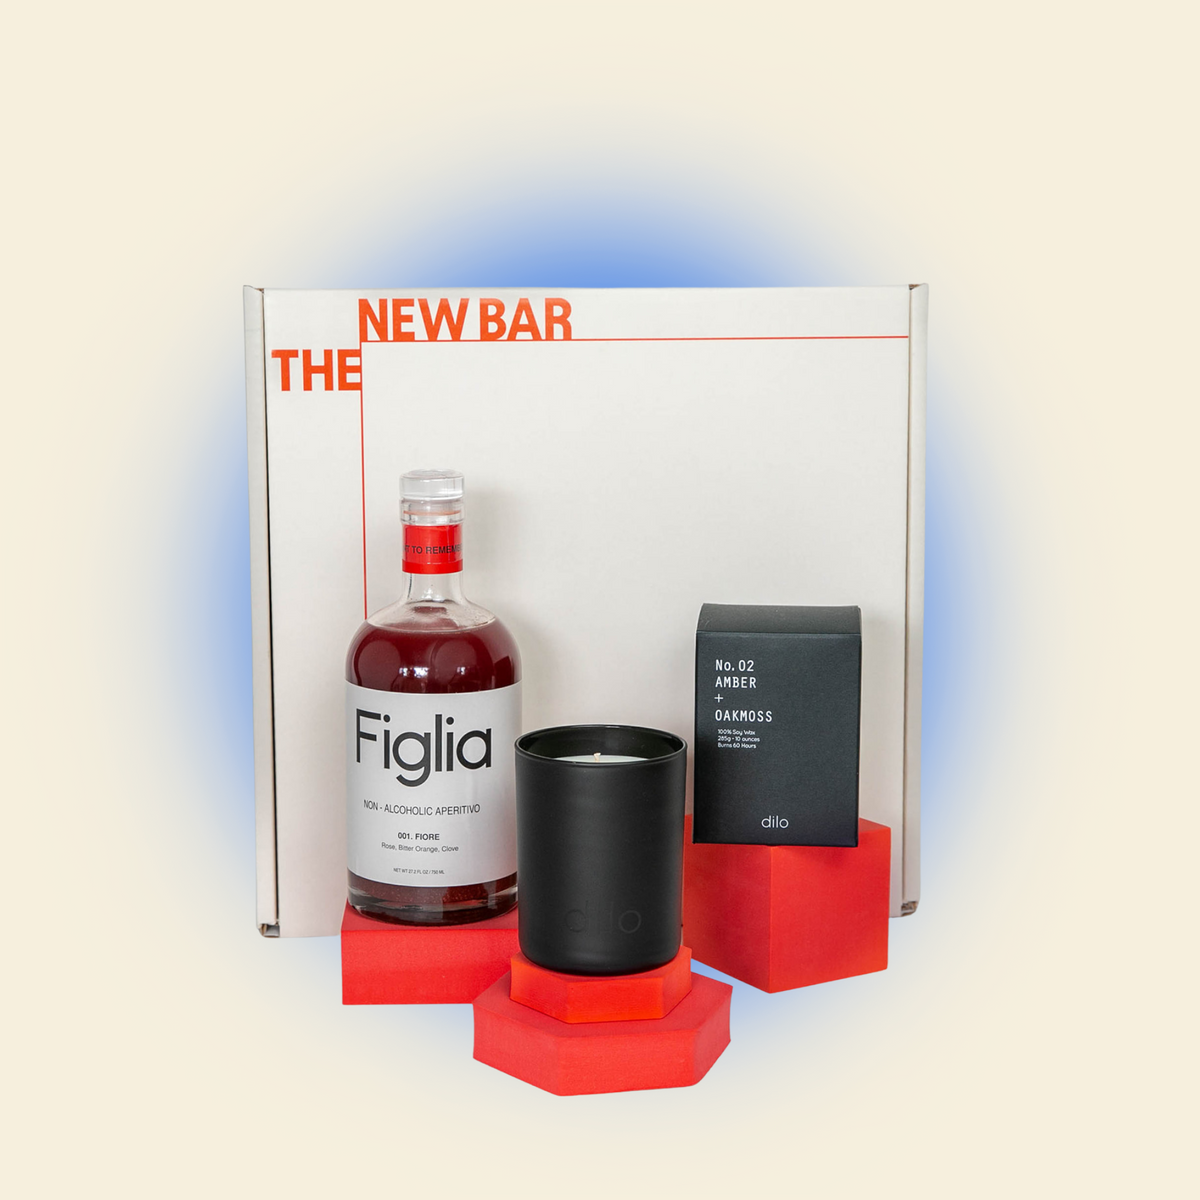 Figlia nonalcoholic aperitif gift set with candle